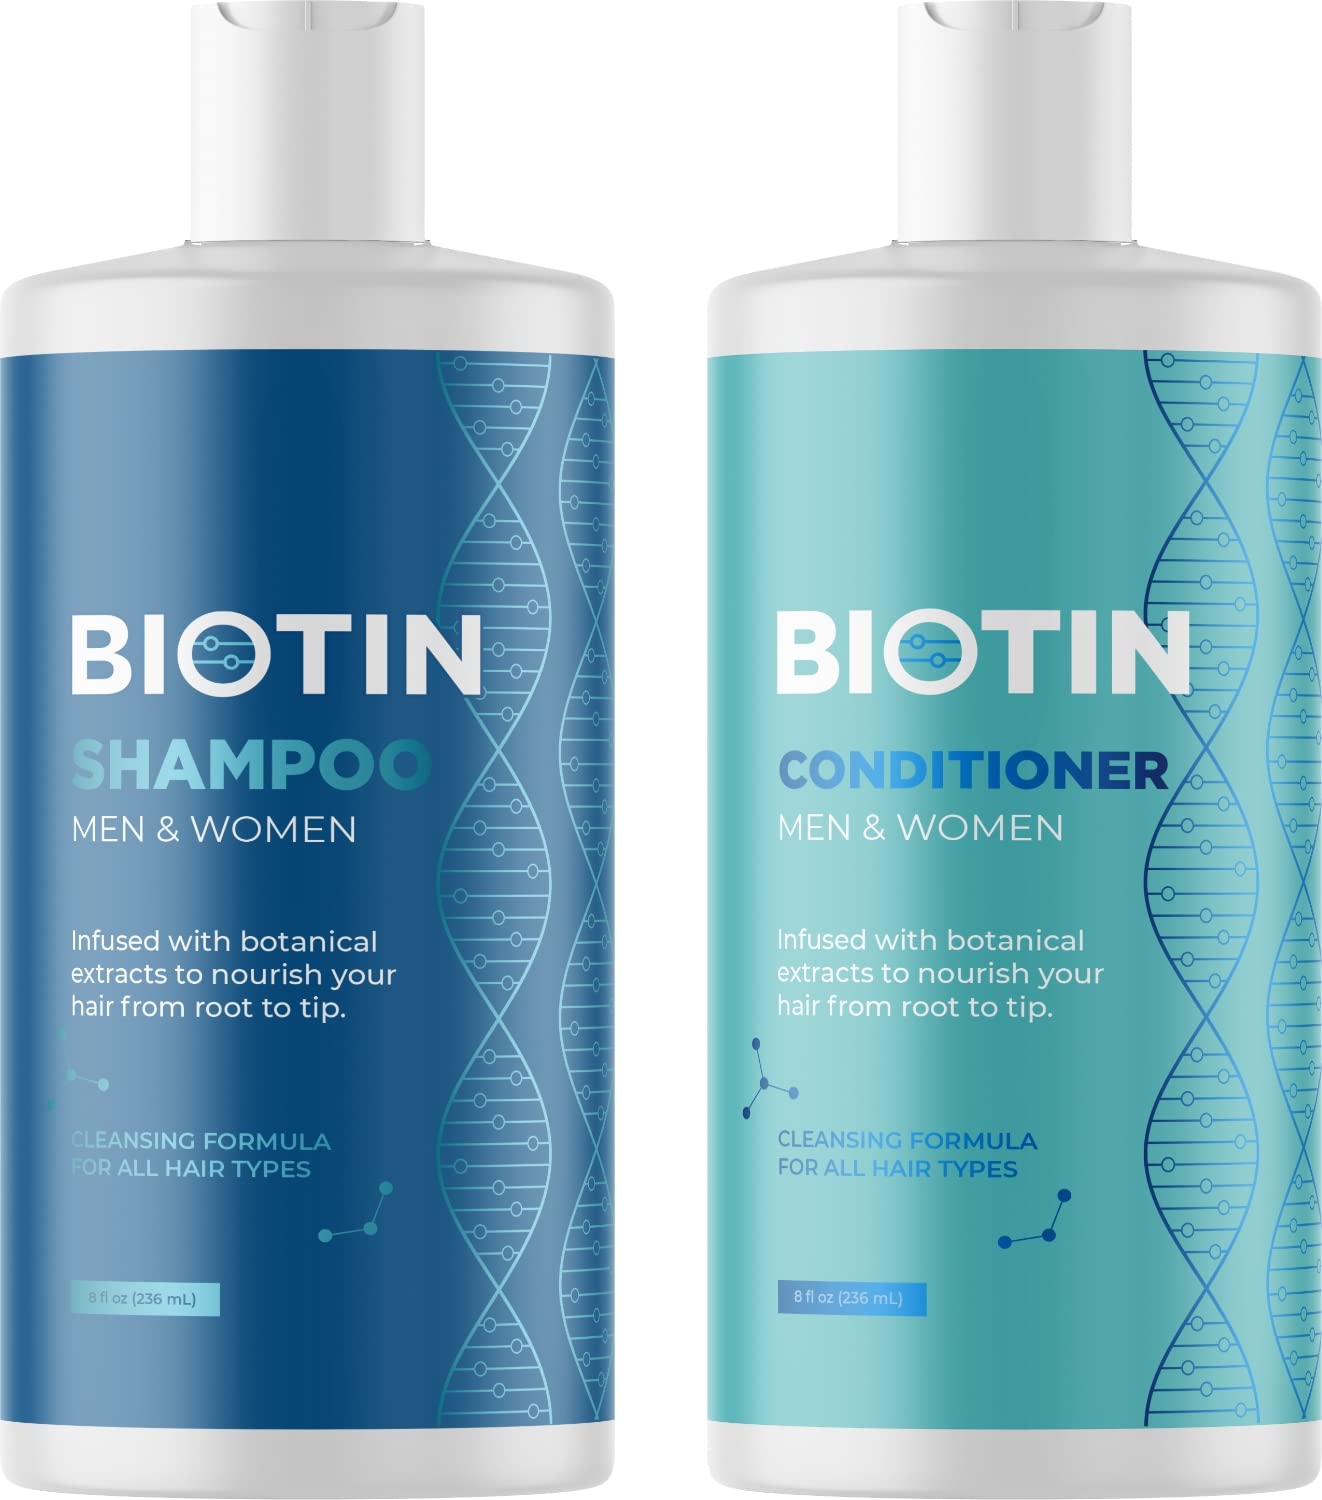 Hair Thickening Products for Women and Men - Sulfate Free Hair Thickening Shampoo and Biotin Hair Growth Conditioner plus Biotin Hair Growth Serum featuring Castor and Rosemary Oil for Hair Growth